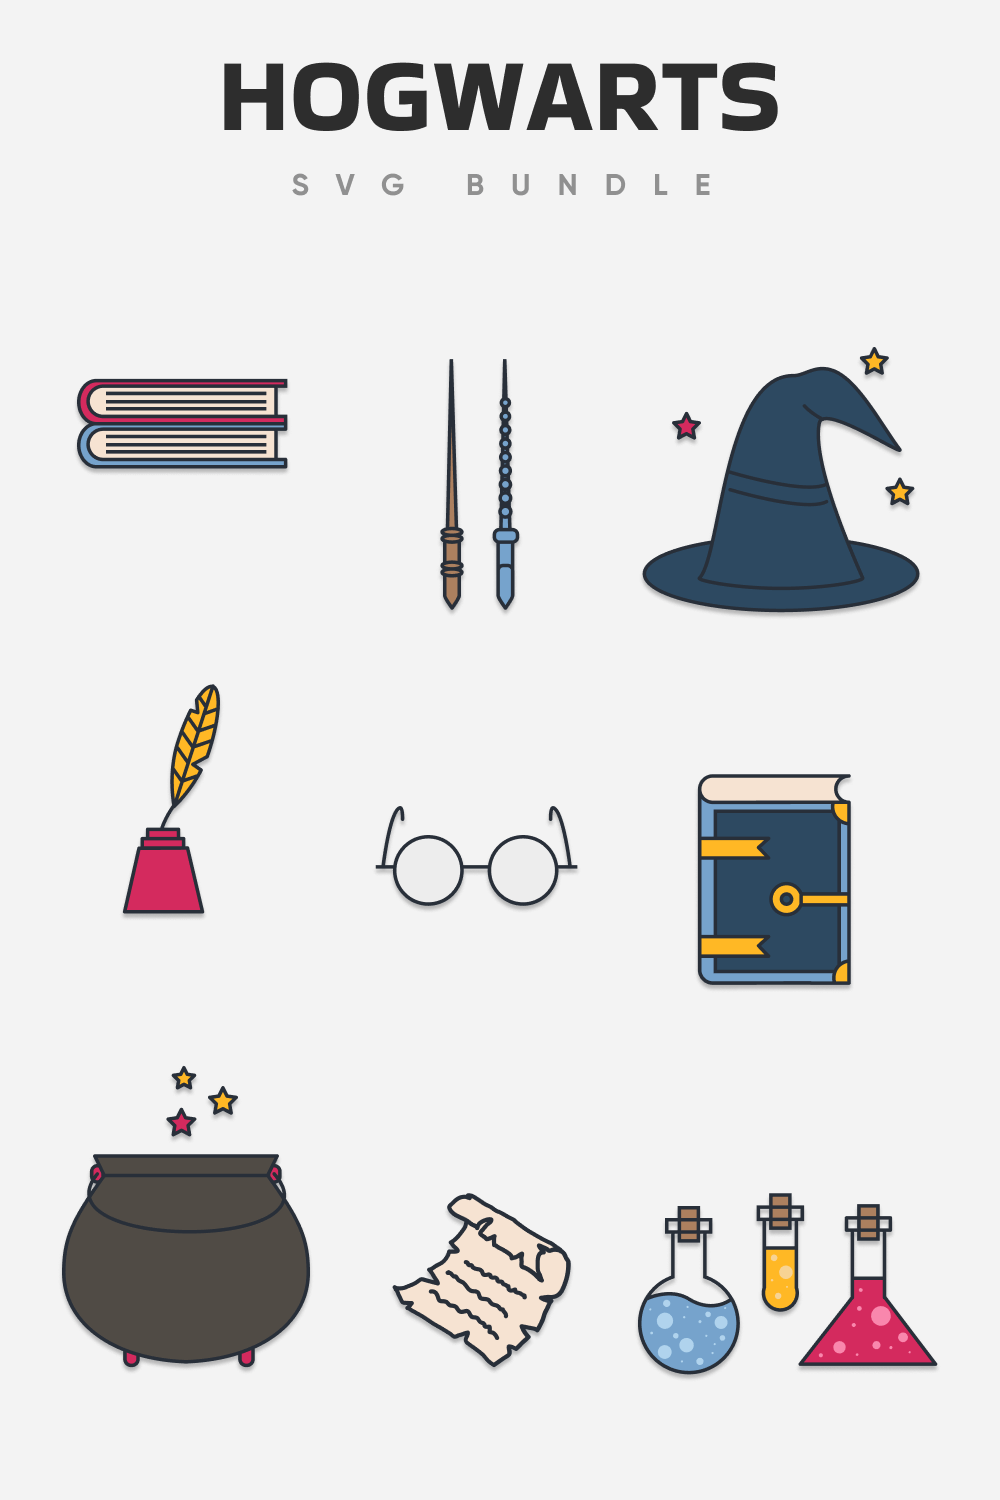 Collection of Hogwarts school symbols: books of magic, wands, hat, feather, Potter's glasses, vat of potion, spells, potions.